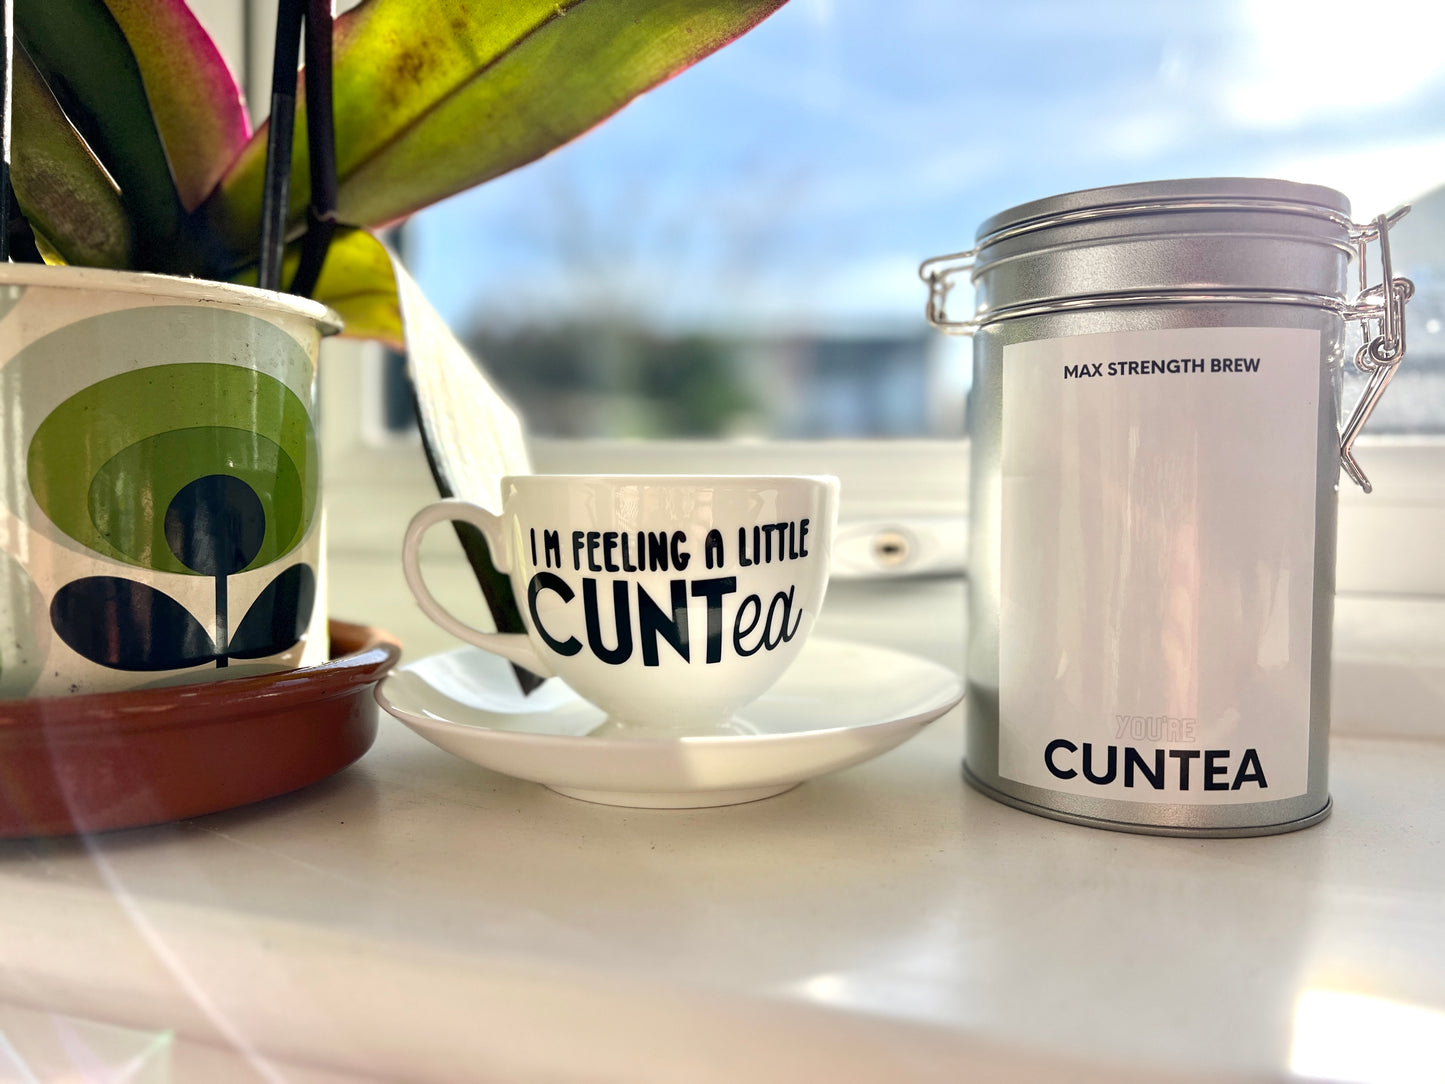 I’m feeling a little CUNTea - China Cup & Saucer